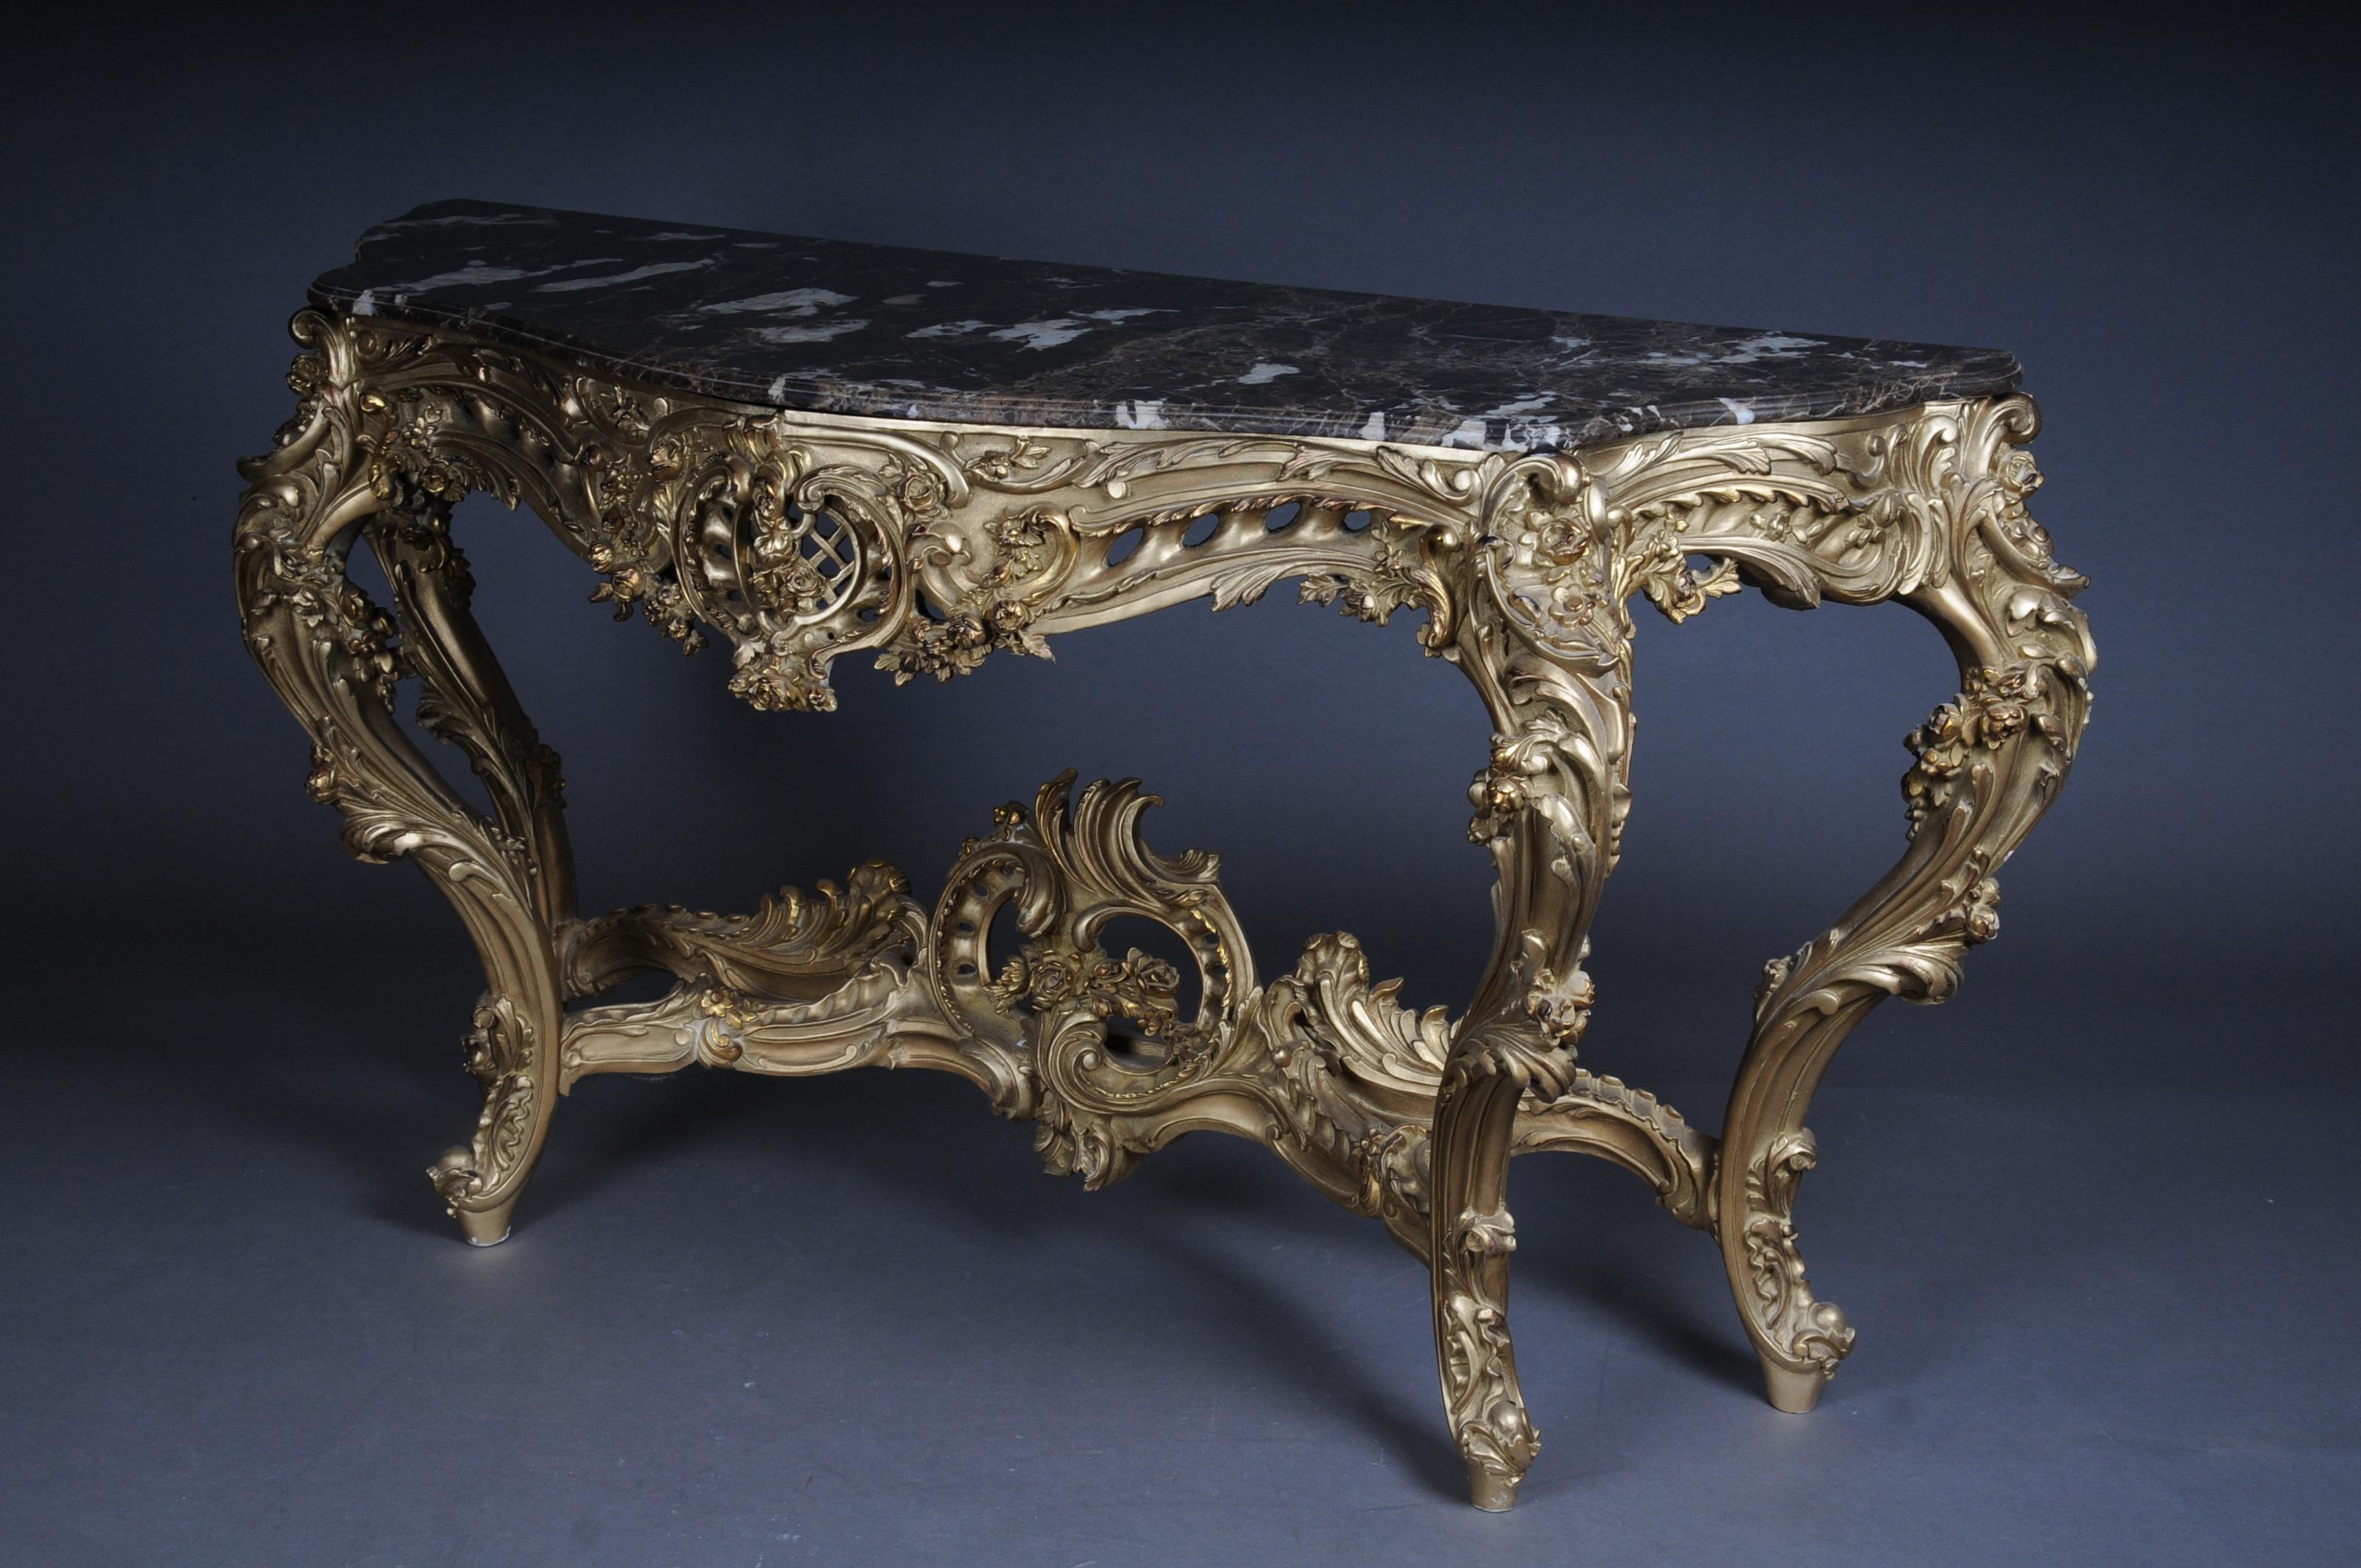 Hand-Carved Magnificent Rococo Mirror Console / Sideboard, Gold Beech Wood, Gilt For Sale